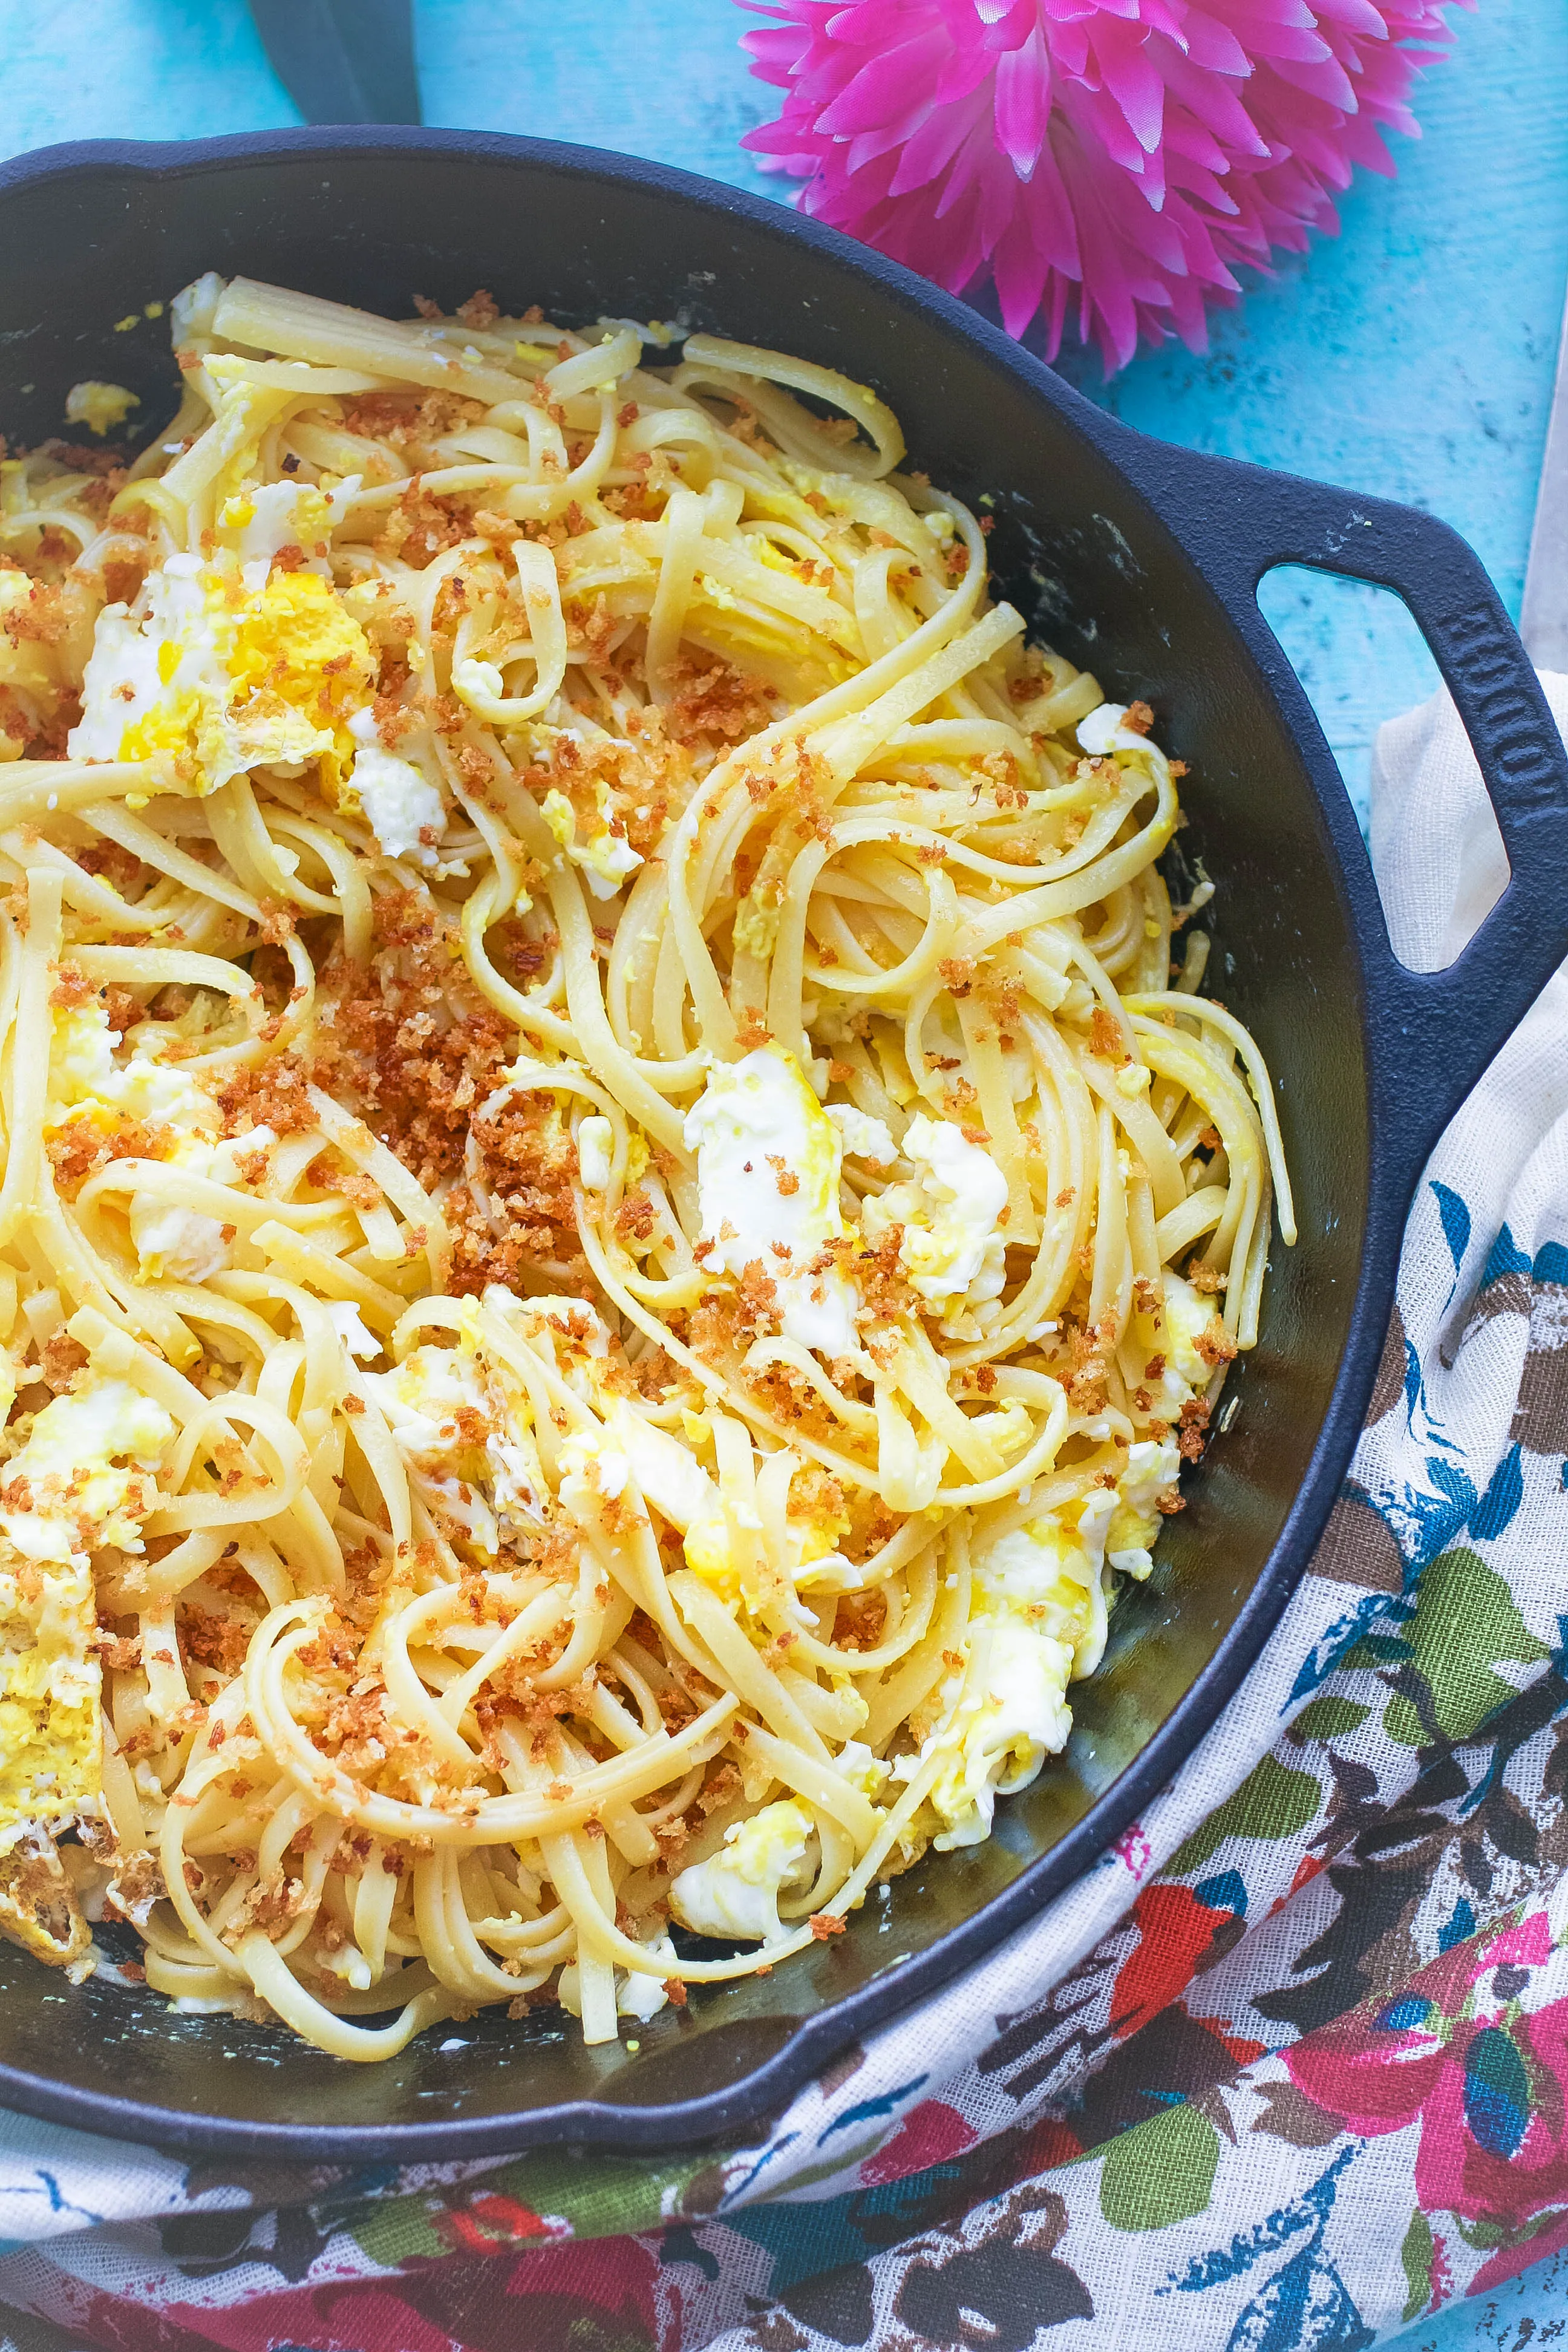 Spaghetti with Fried Eggs and Crunchy Breadcrumbs is a super-simple dish you'll want to make on a busy night. Spaghetti with Fried Eggs and Crunchy Breadcrumbs is a delightful dish for any night when you're short on time.